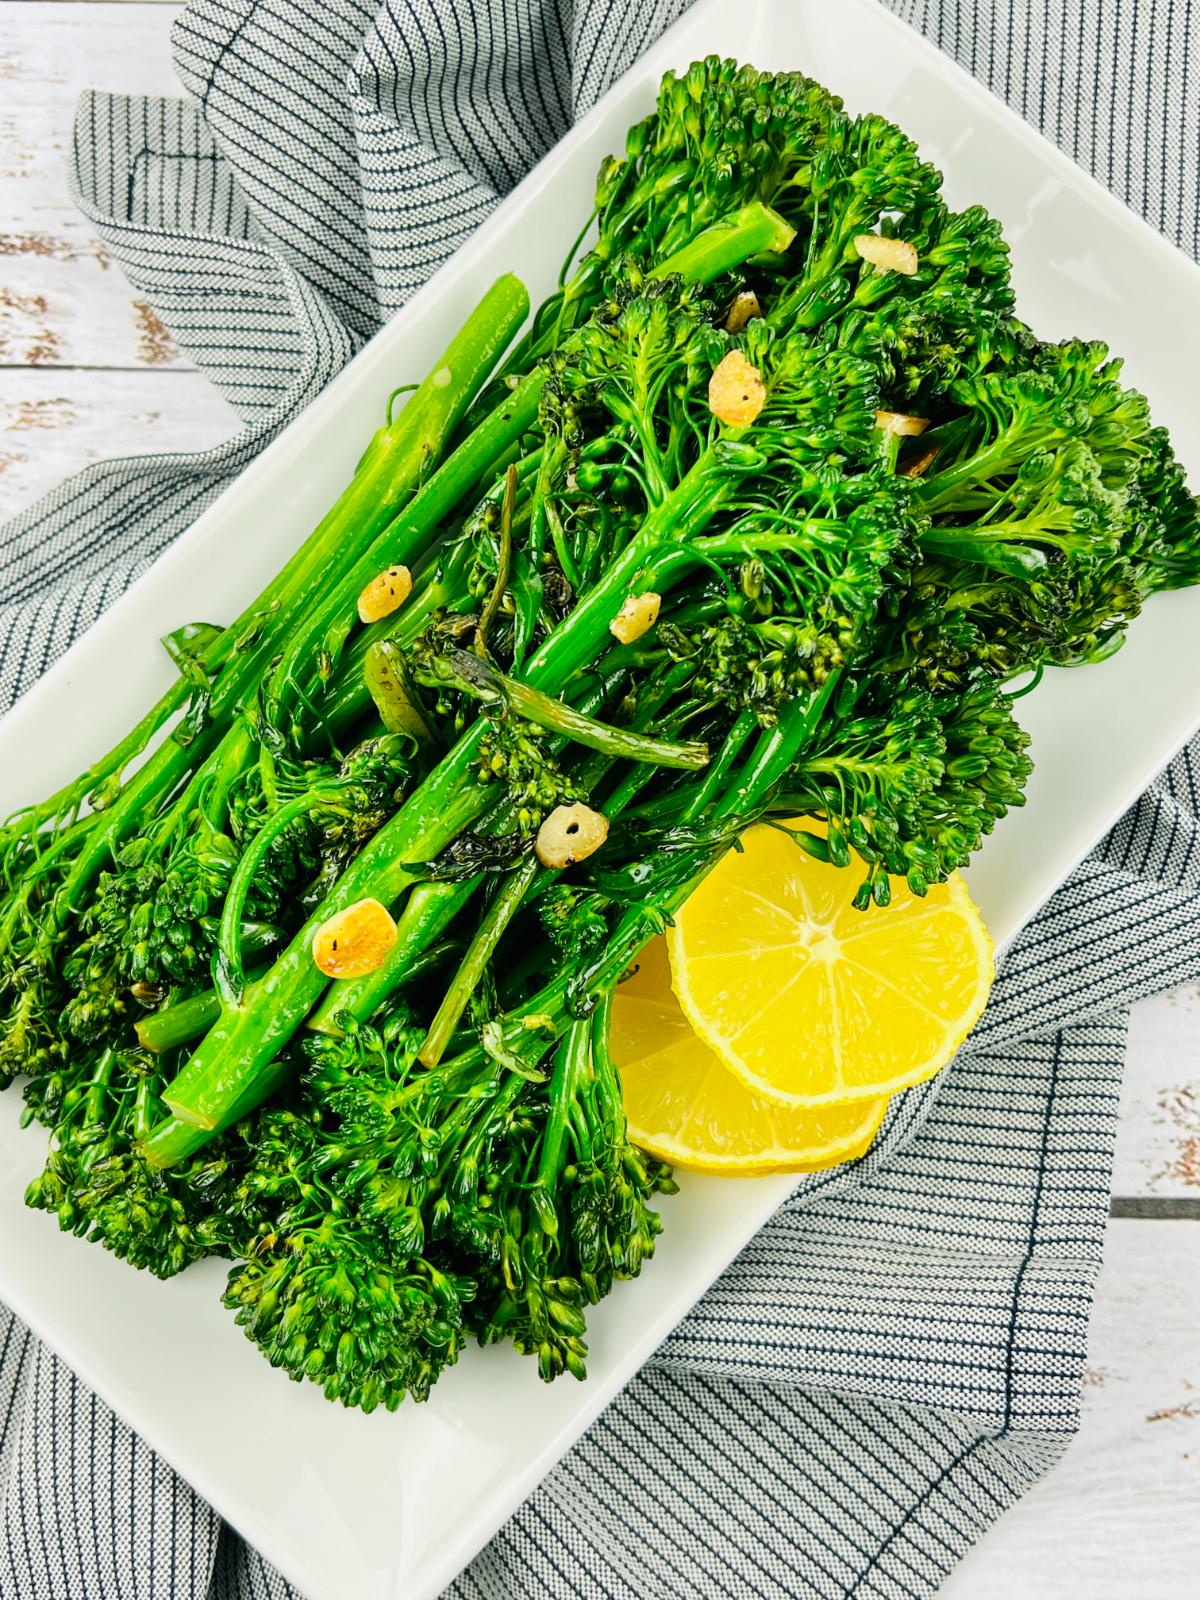 Overhead view of Tenderstem broccoli with garlic and lemon slices on a white serving platter.